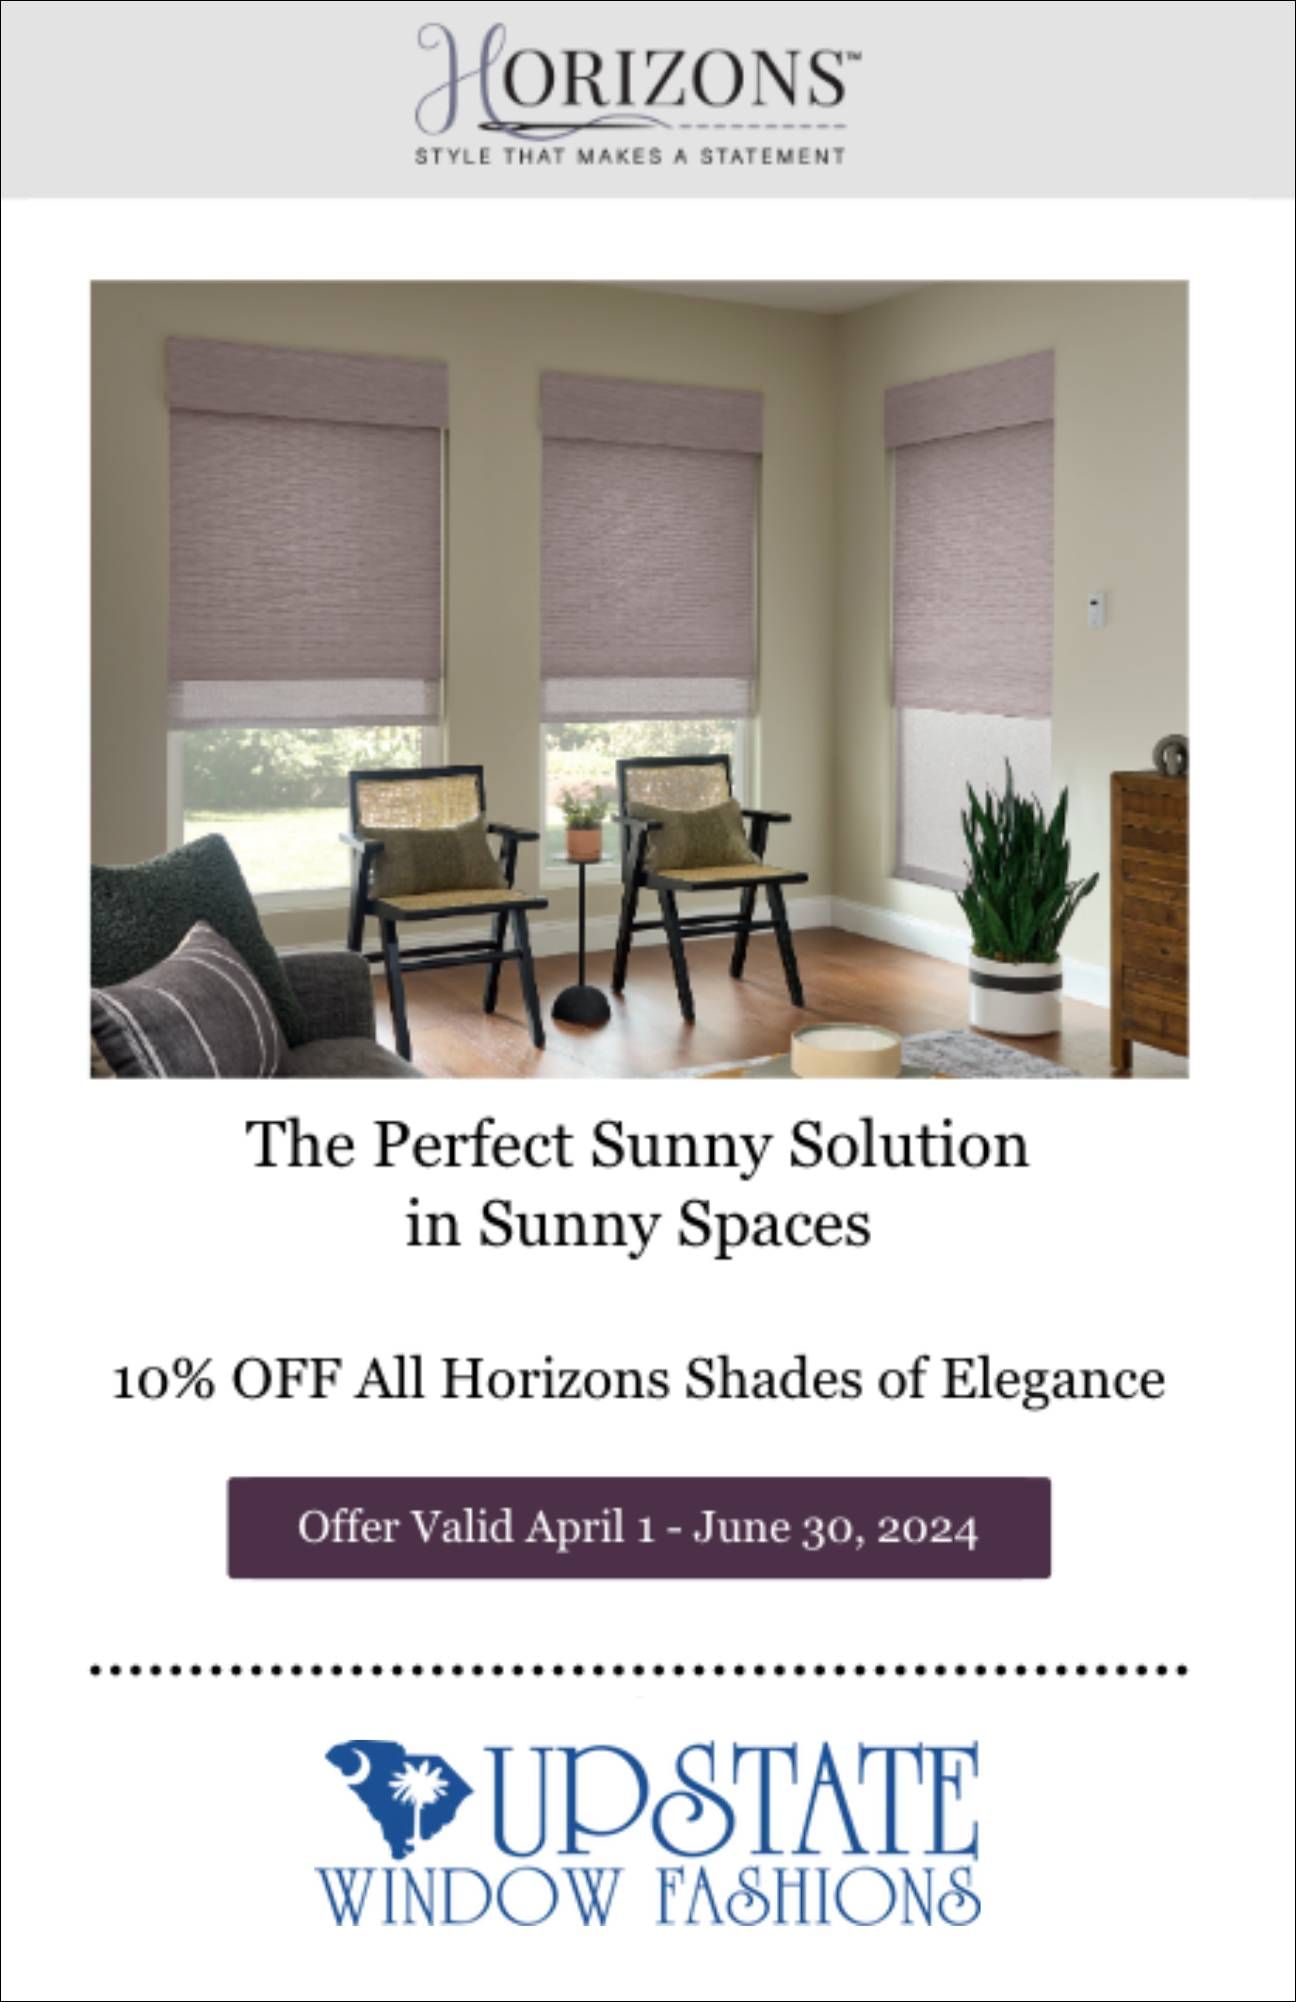 10% OFF All horizons Shades of Elegance